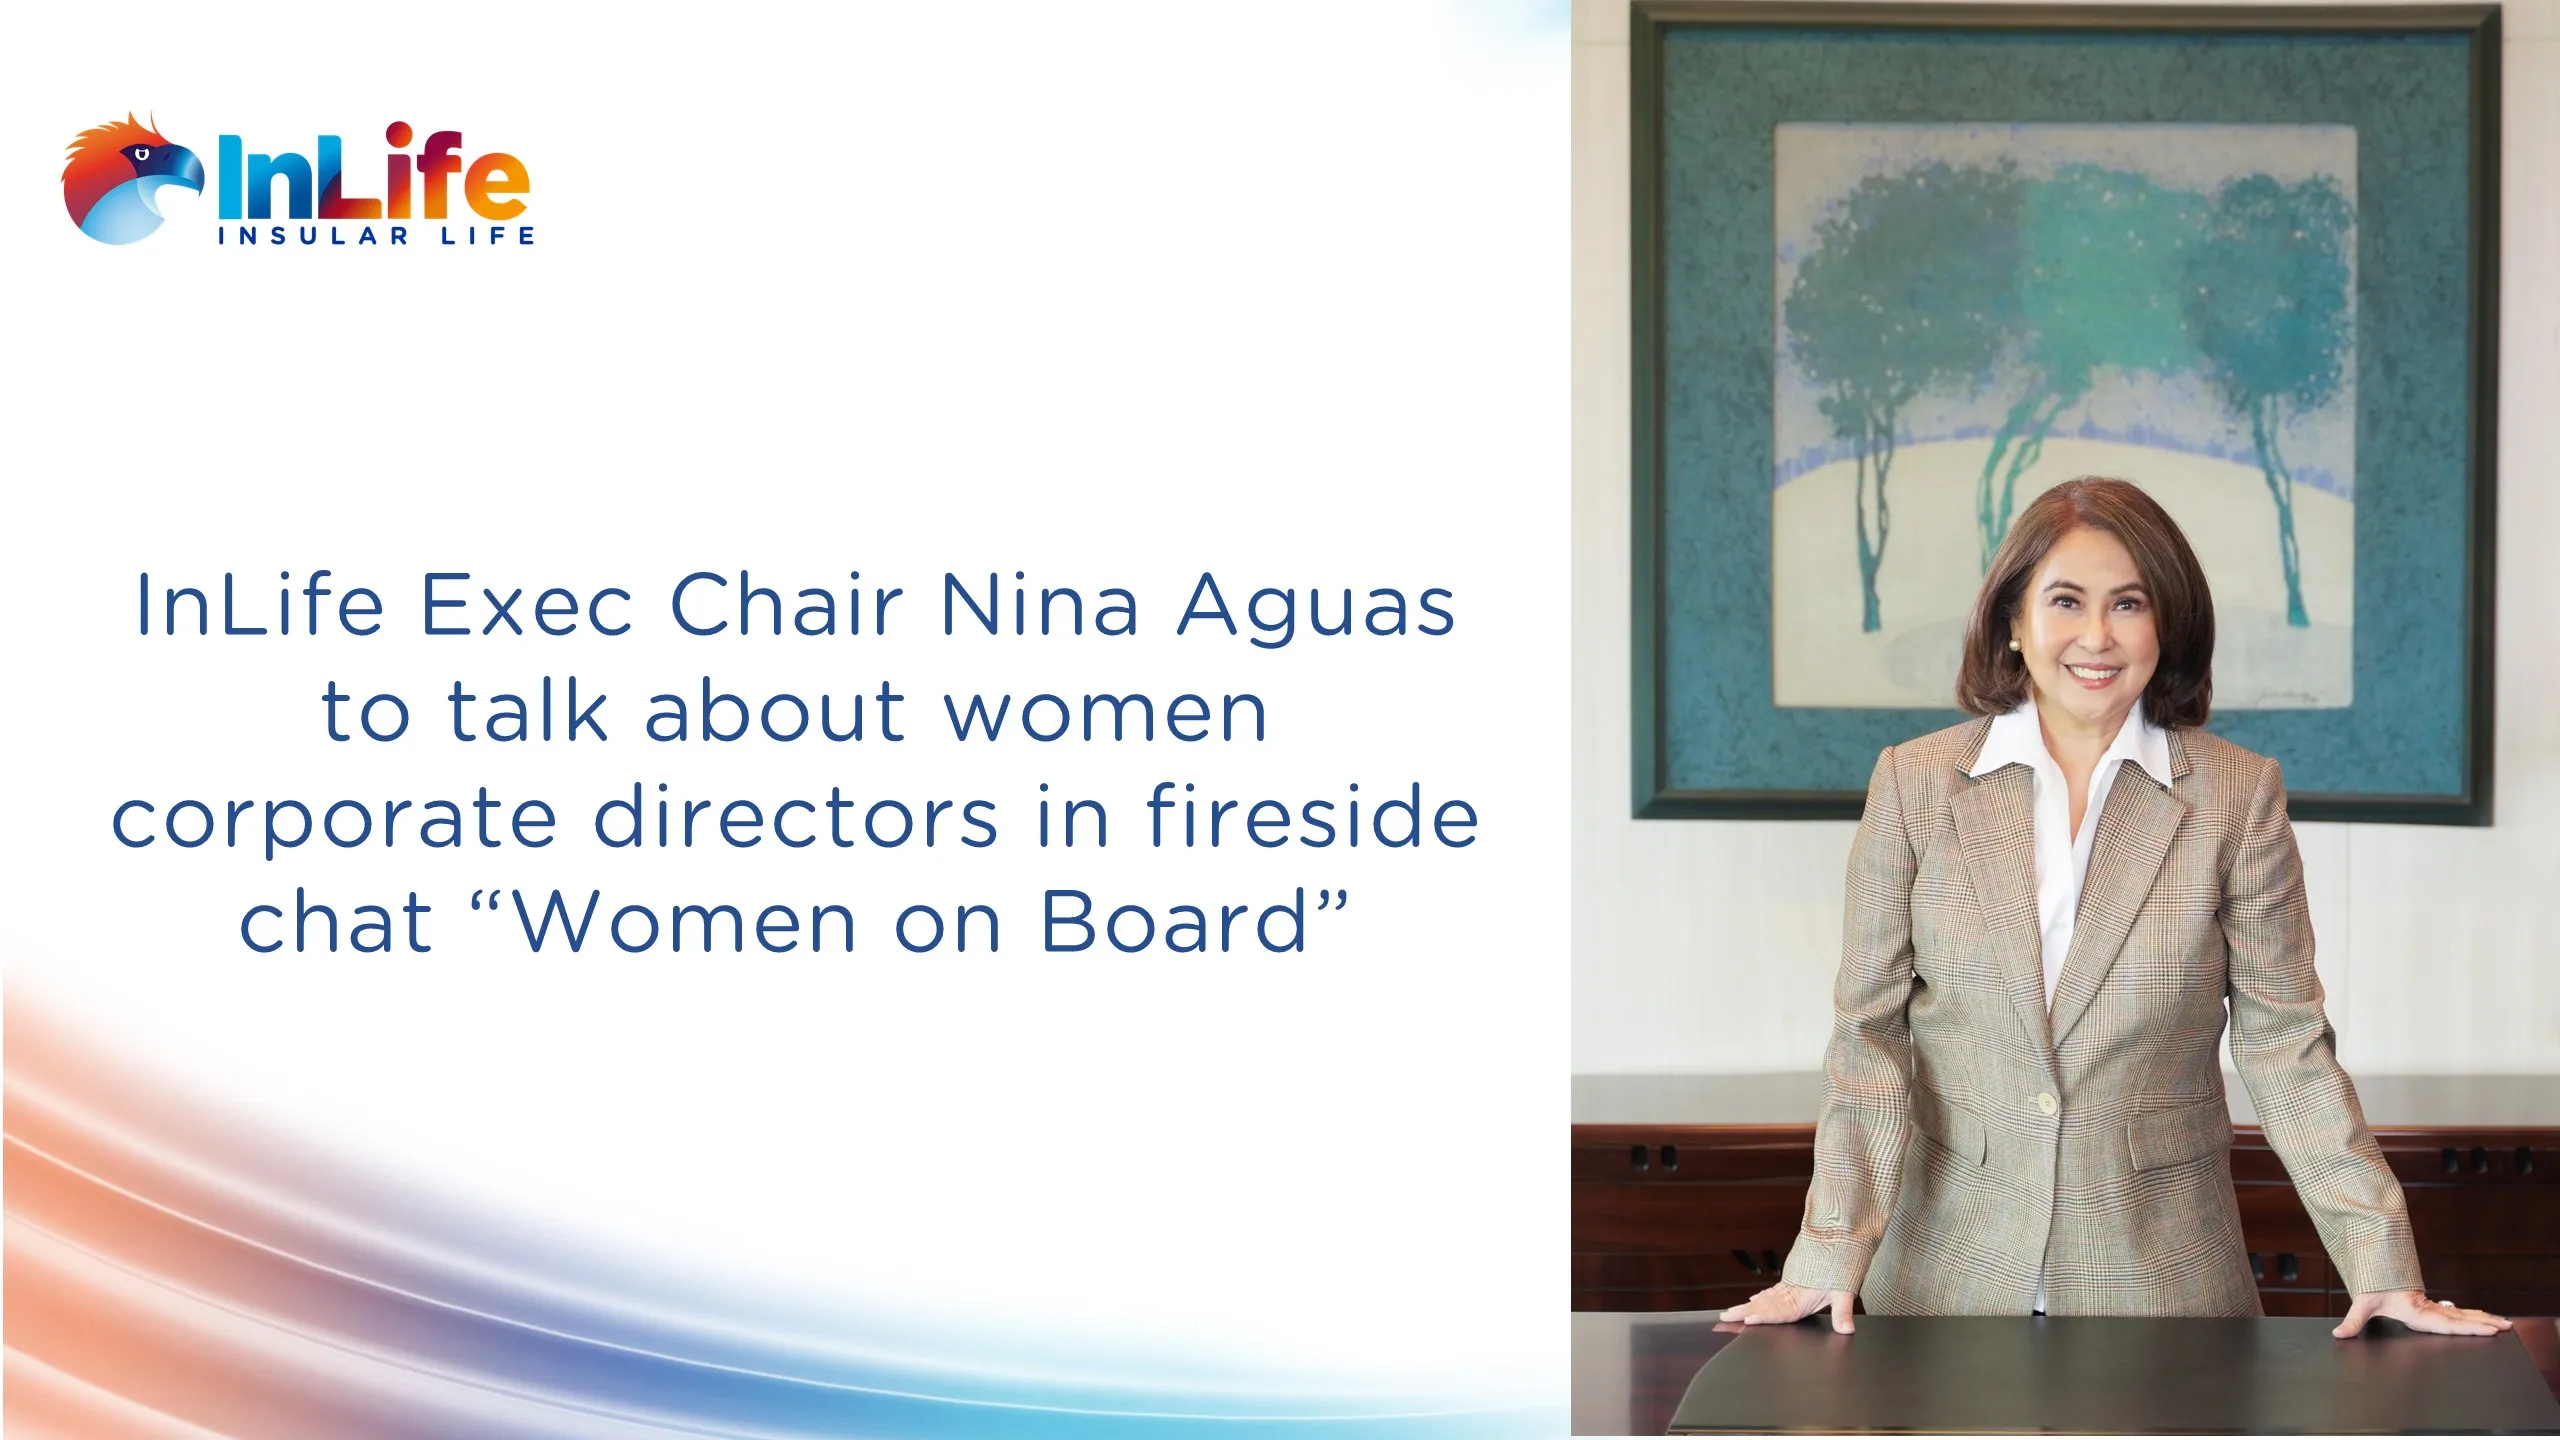 inlife-exec-chair-nina-aguas-to-talk-about-women-corporate-directors-in-fireside-chat-women-on-board